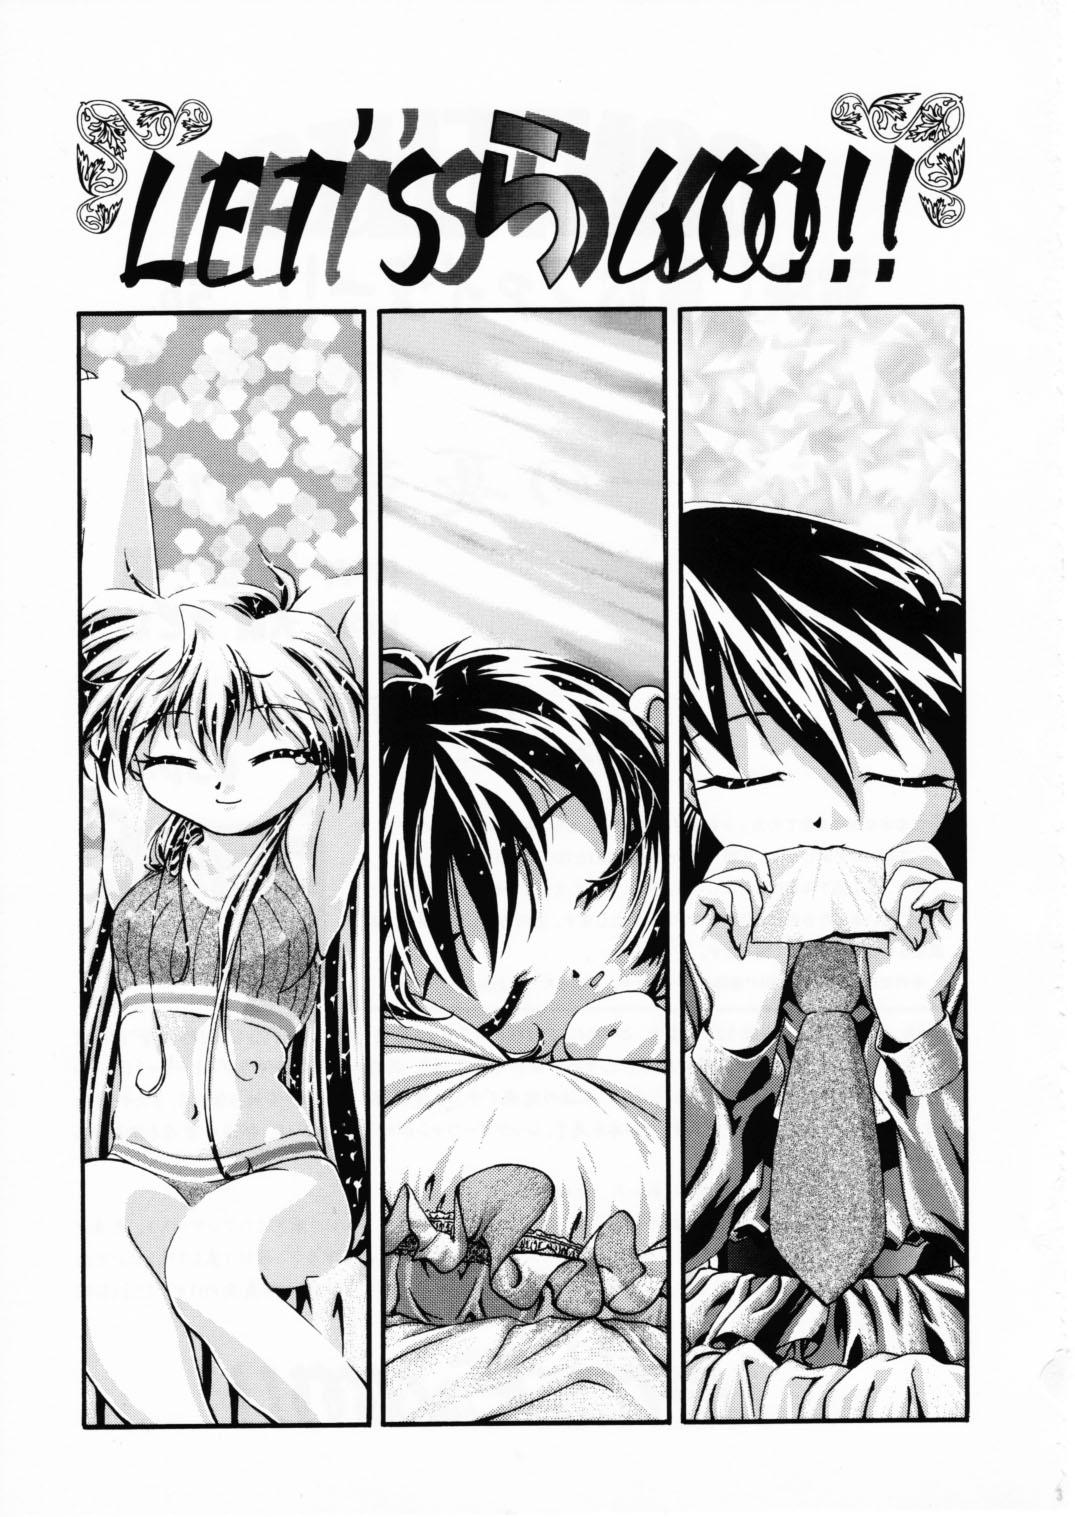 Smooth Let's Ra Mix 2 LET'S GO - Bakusou kyoudai lets and go Real Amateur - Page 2